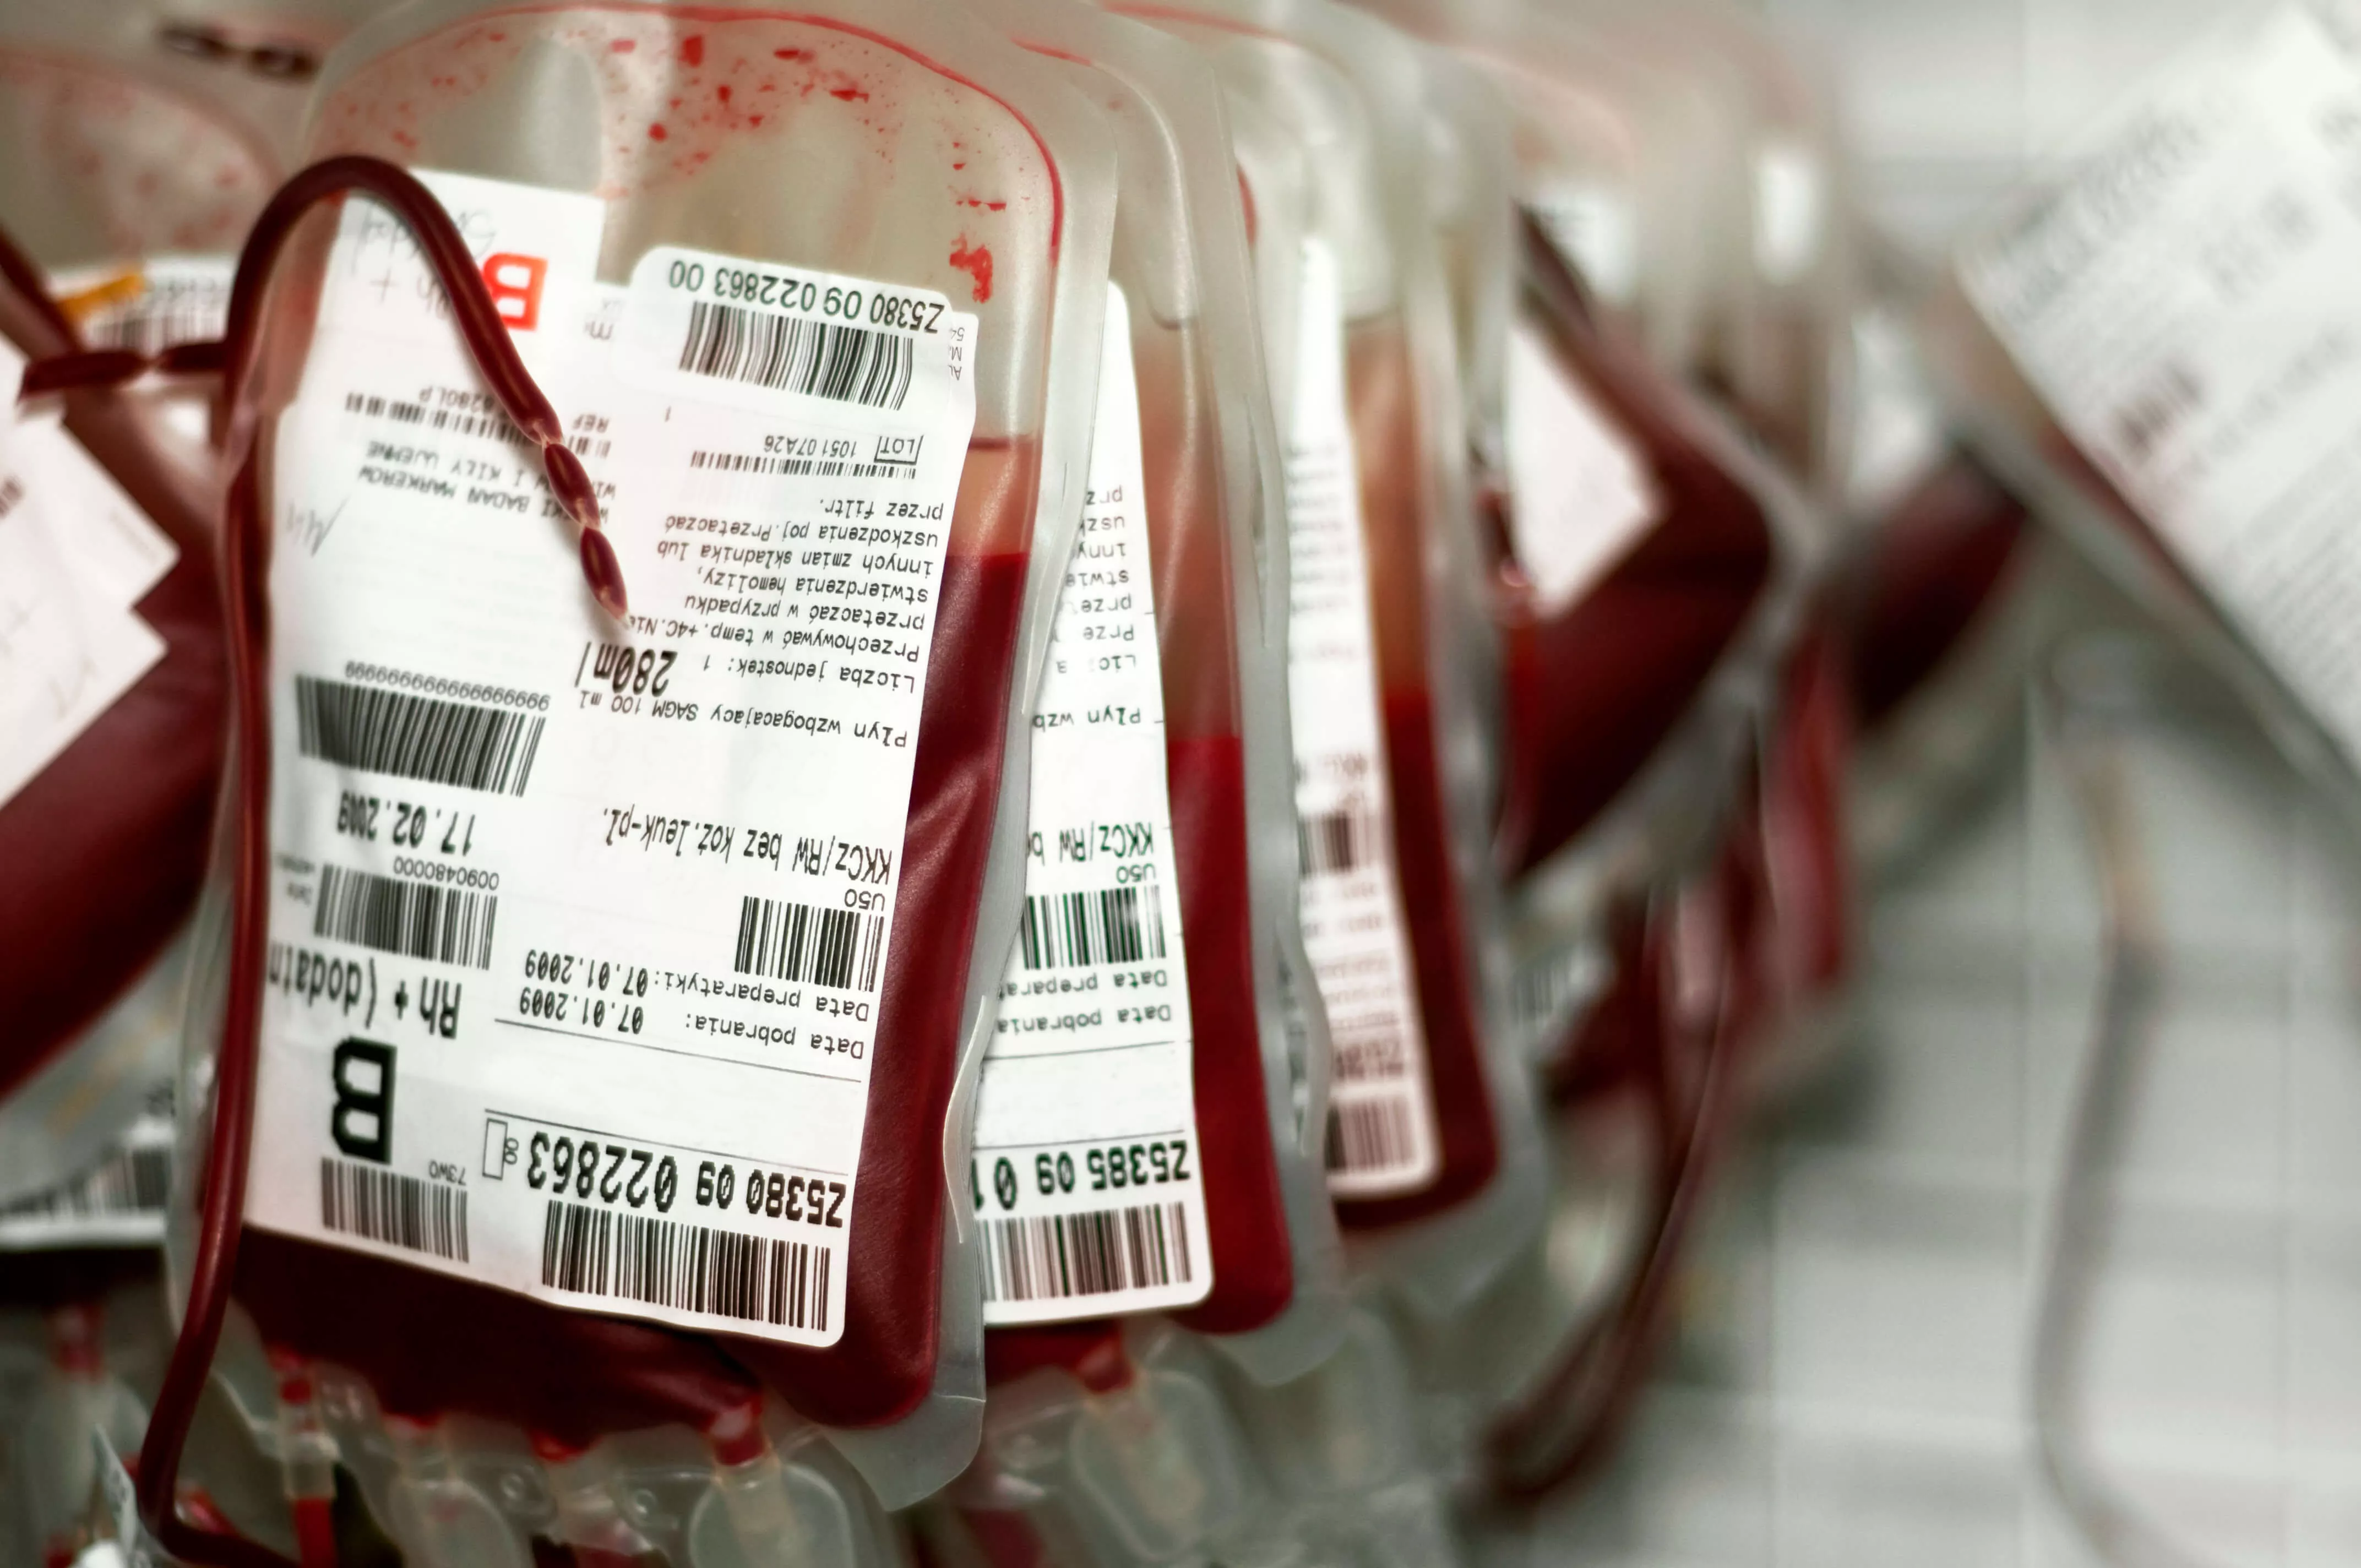 Image of blood bags or blood containers